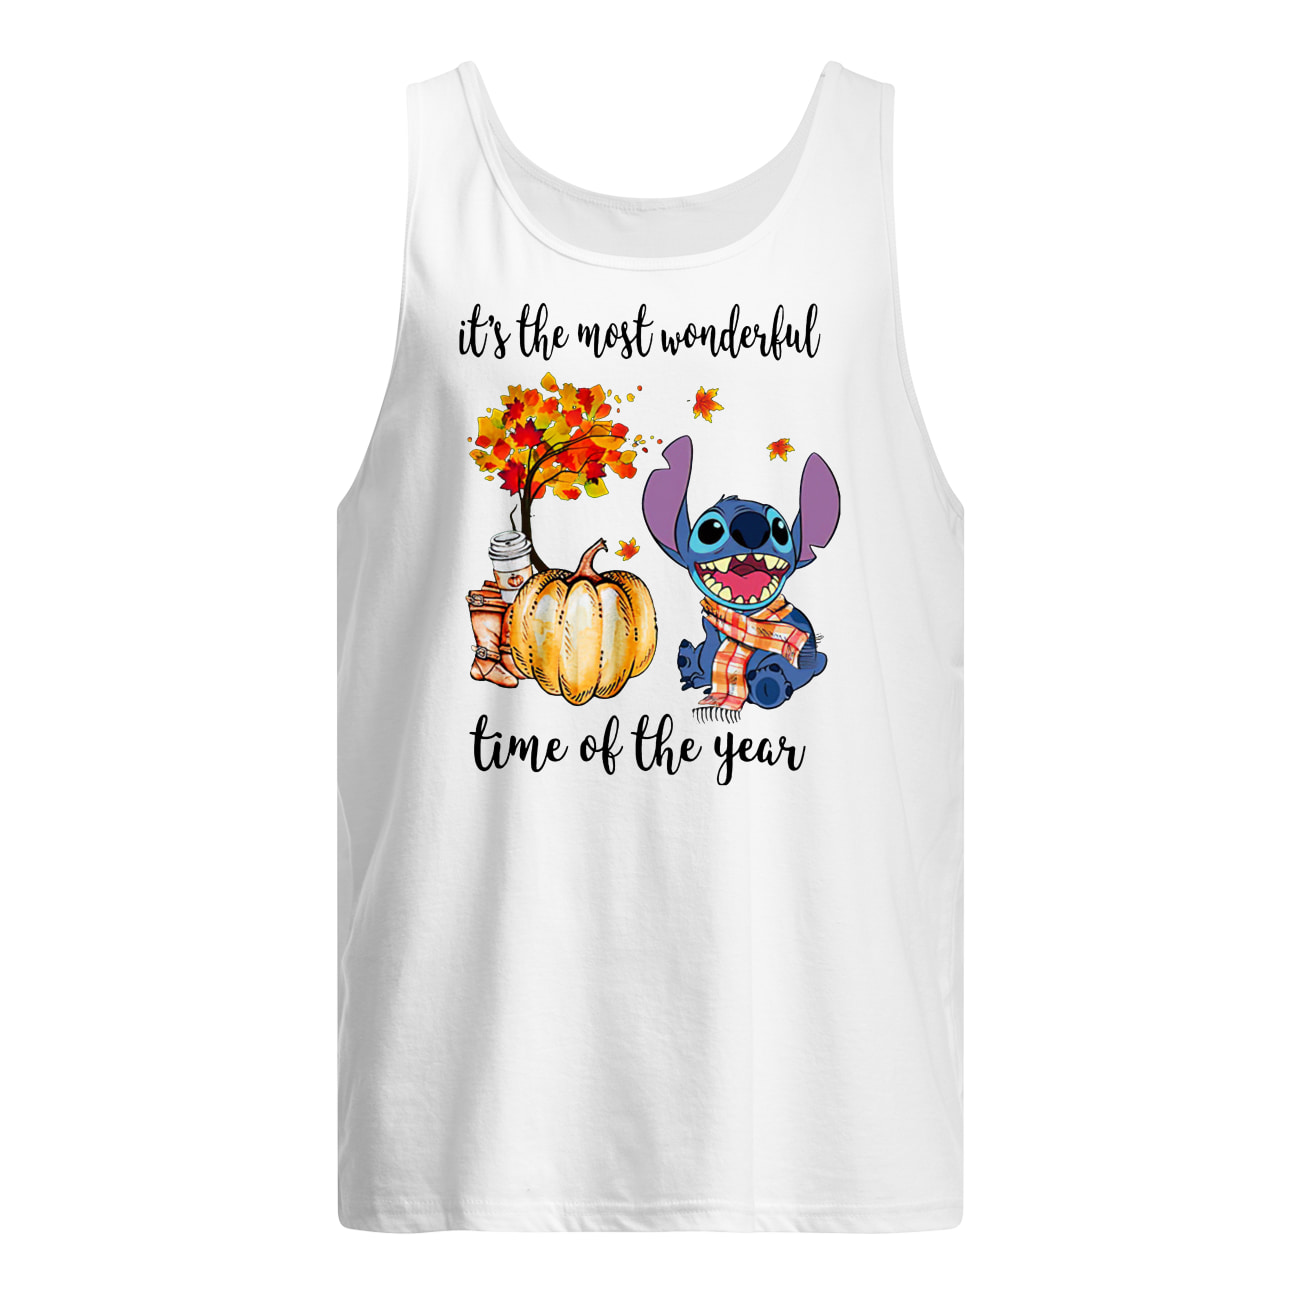 Stitch it’s the most wonderful time of the year tank top